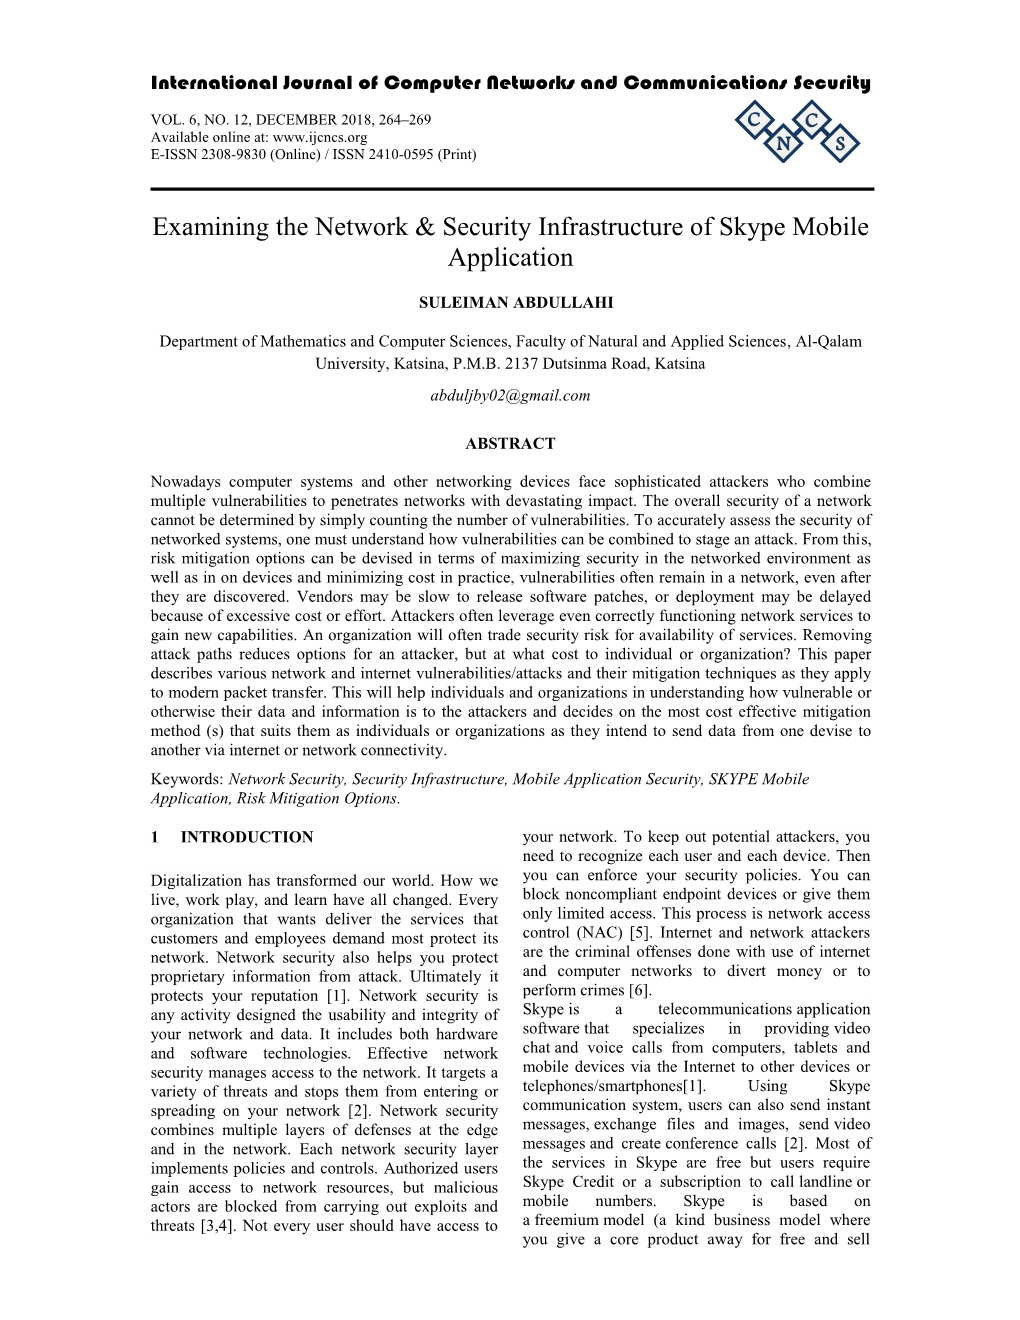 Examining the Network & Security Infrastructure of Skype Mobile